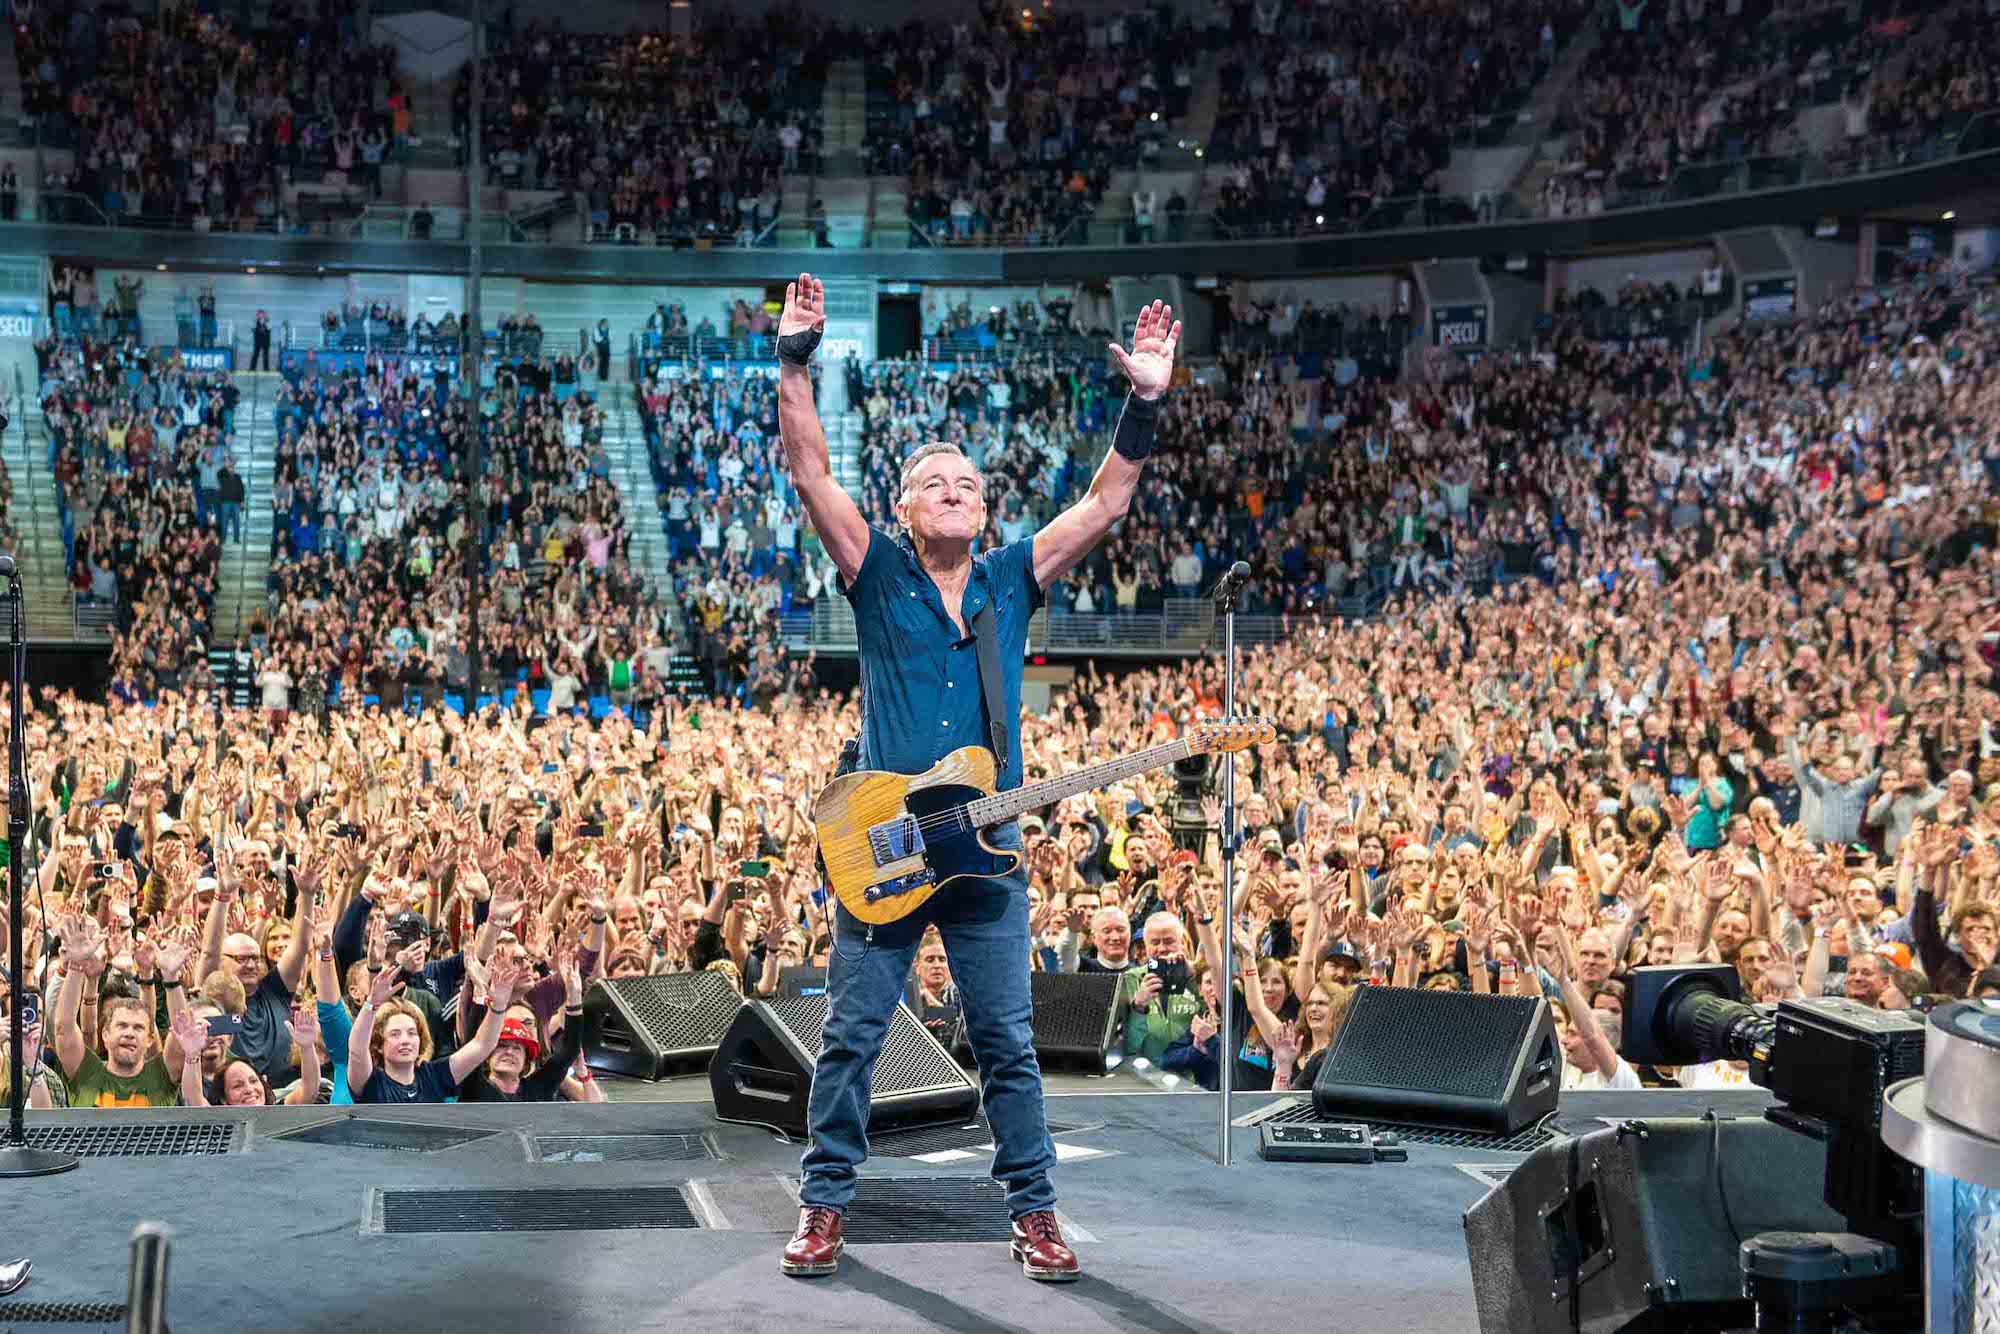 Bruce Springsteen & E Street Band at Bryce Jordan Center, State College, PA on March 18, 2023.